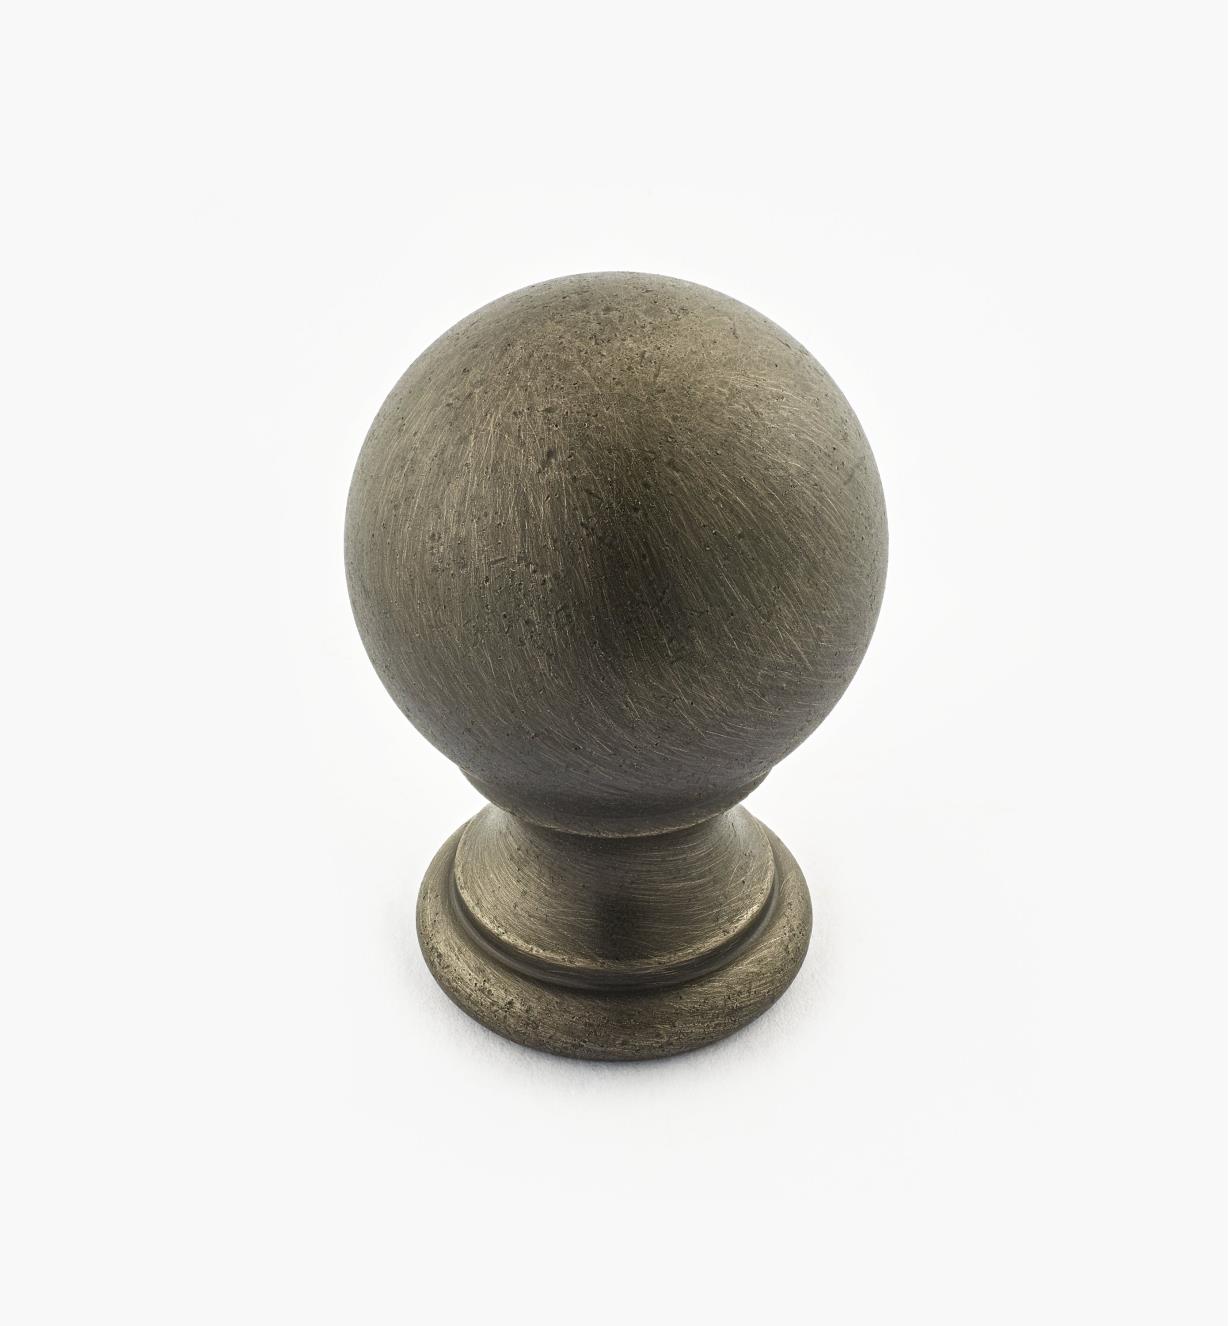 02W3324 - Pewter Suite - 1 1/8" x 1 3/4" Turned Brass Ball Knob